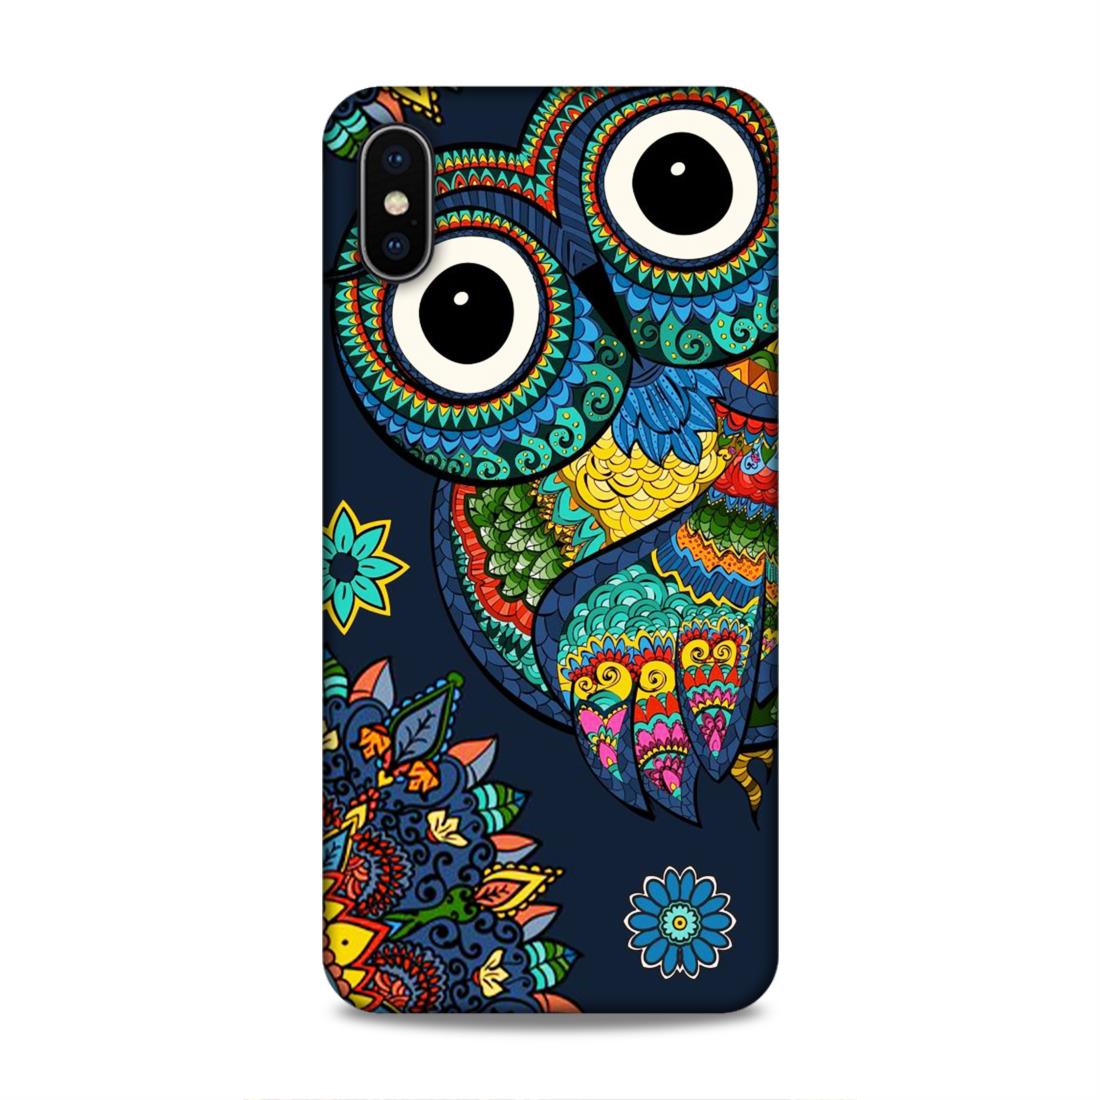 Owl and Mandala Flower Hard Back Case For Apple iPhone XS Max